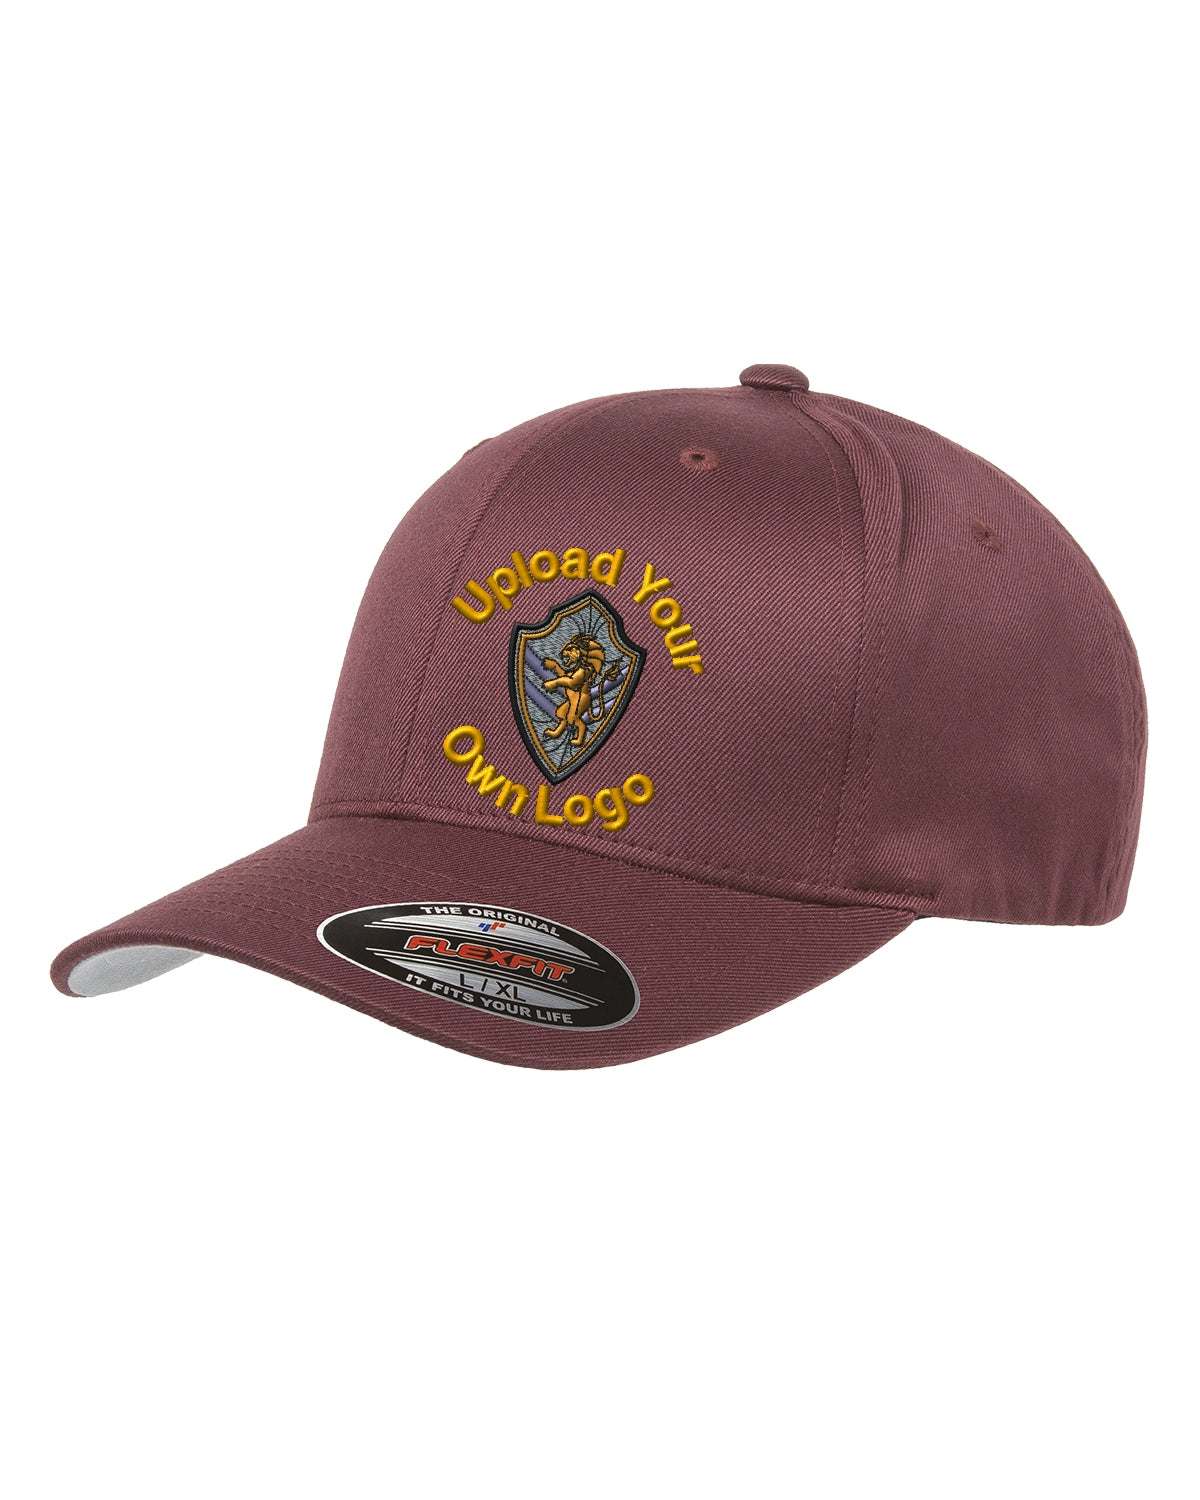 Flex Fitted Ball Cap with Your Company Logo Embroidered - burgundy